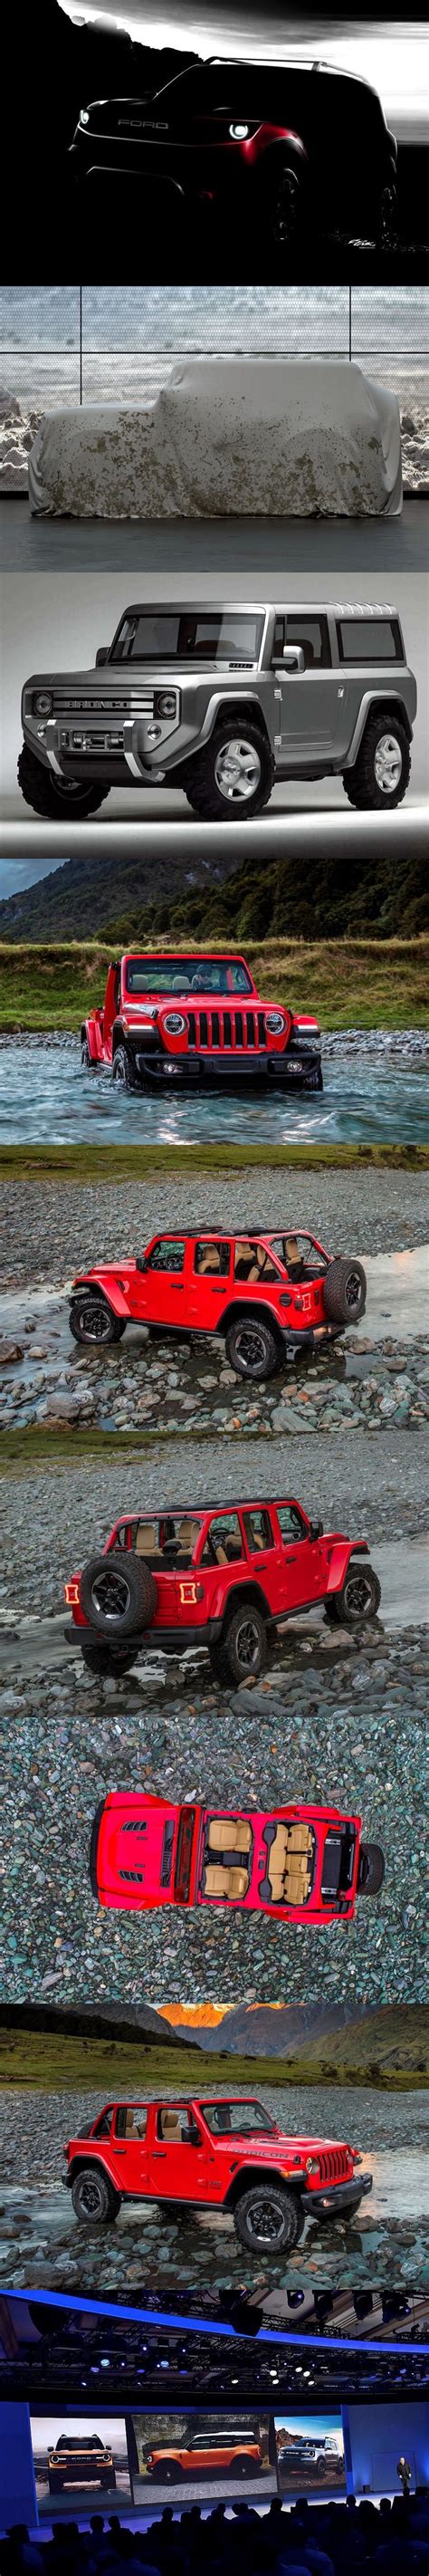 Fords Plans To Dominate The Jeep Wrangler Come Into Focus Ford Could